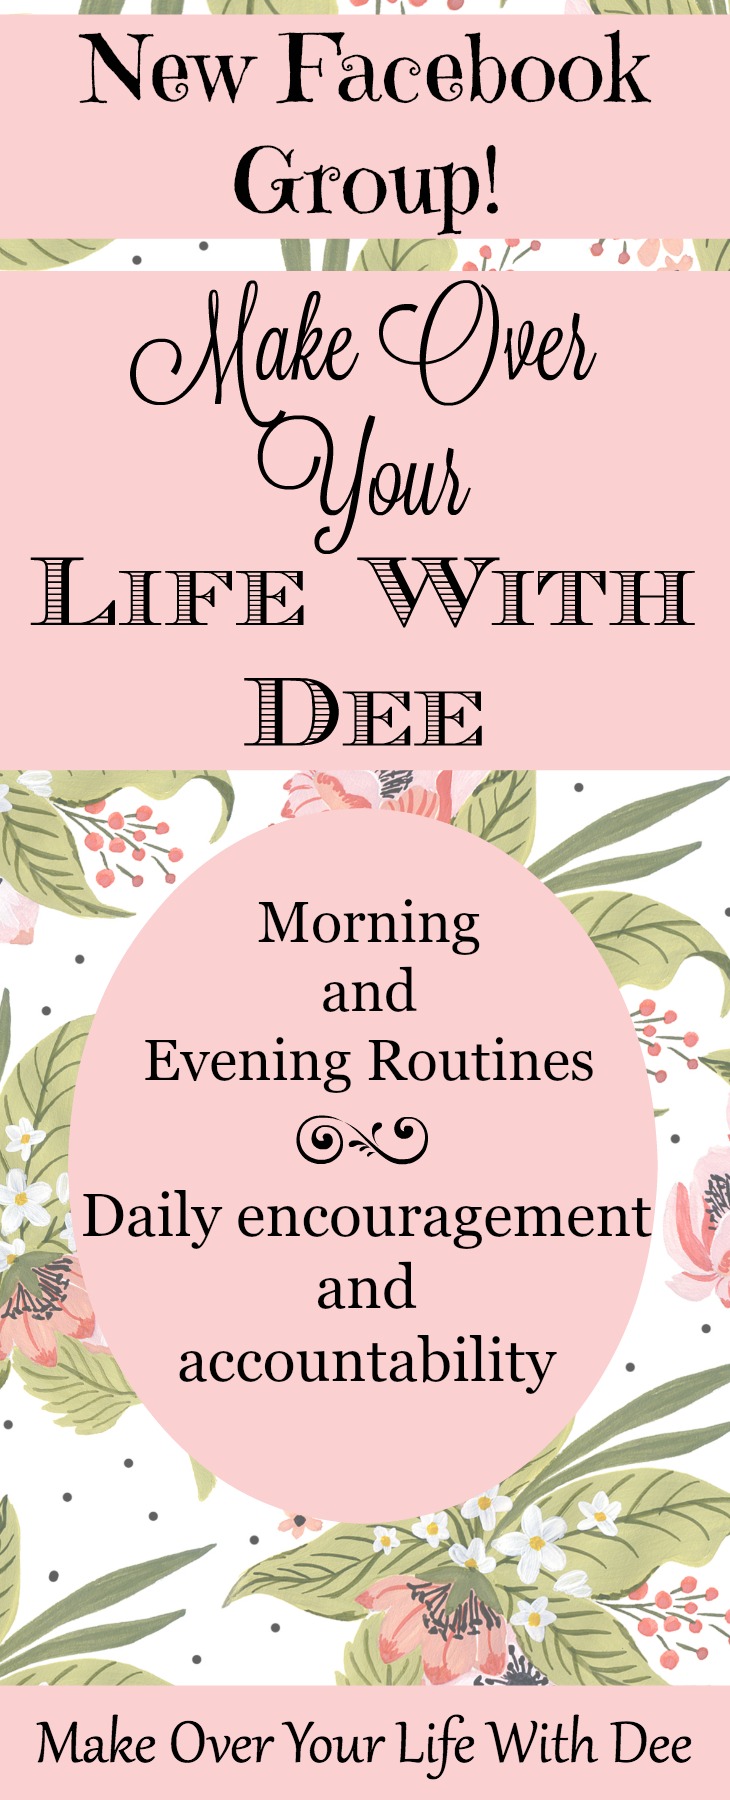 Make Over Your Life With Dee: A New Facebook Group